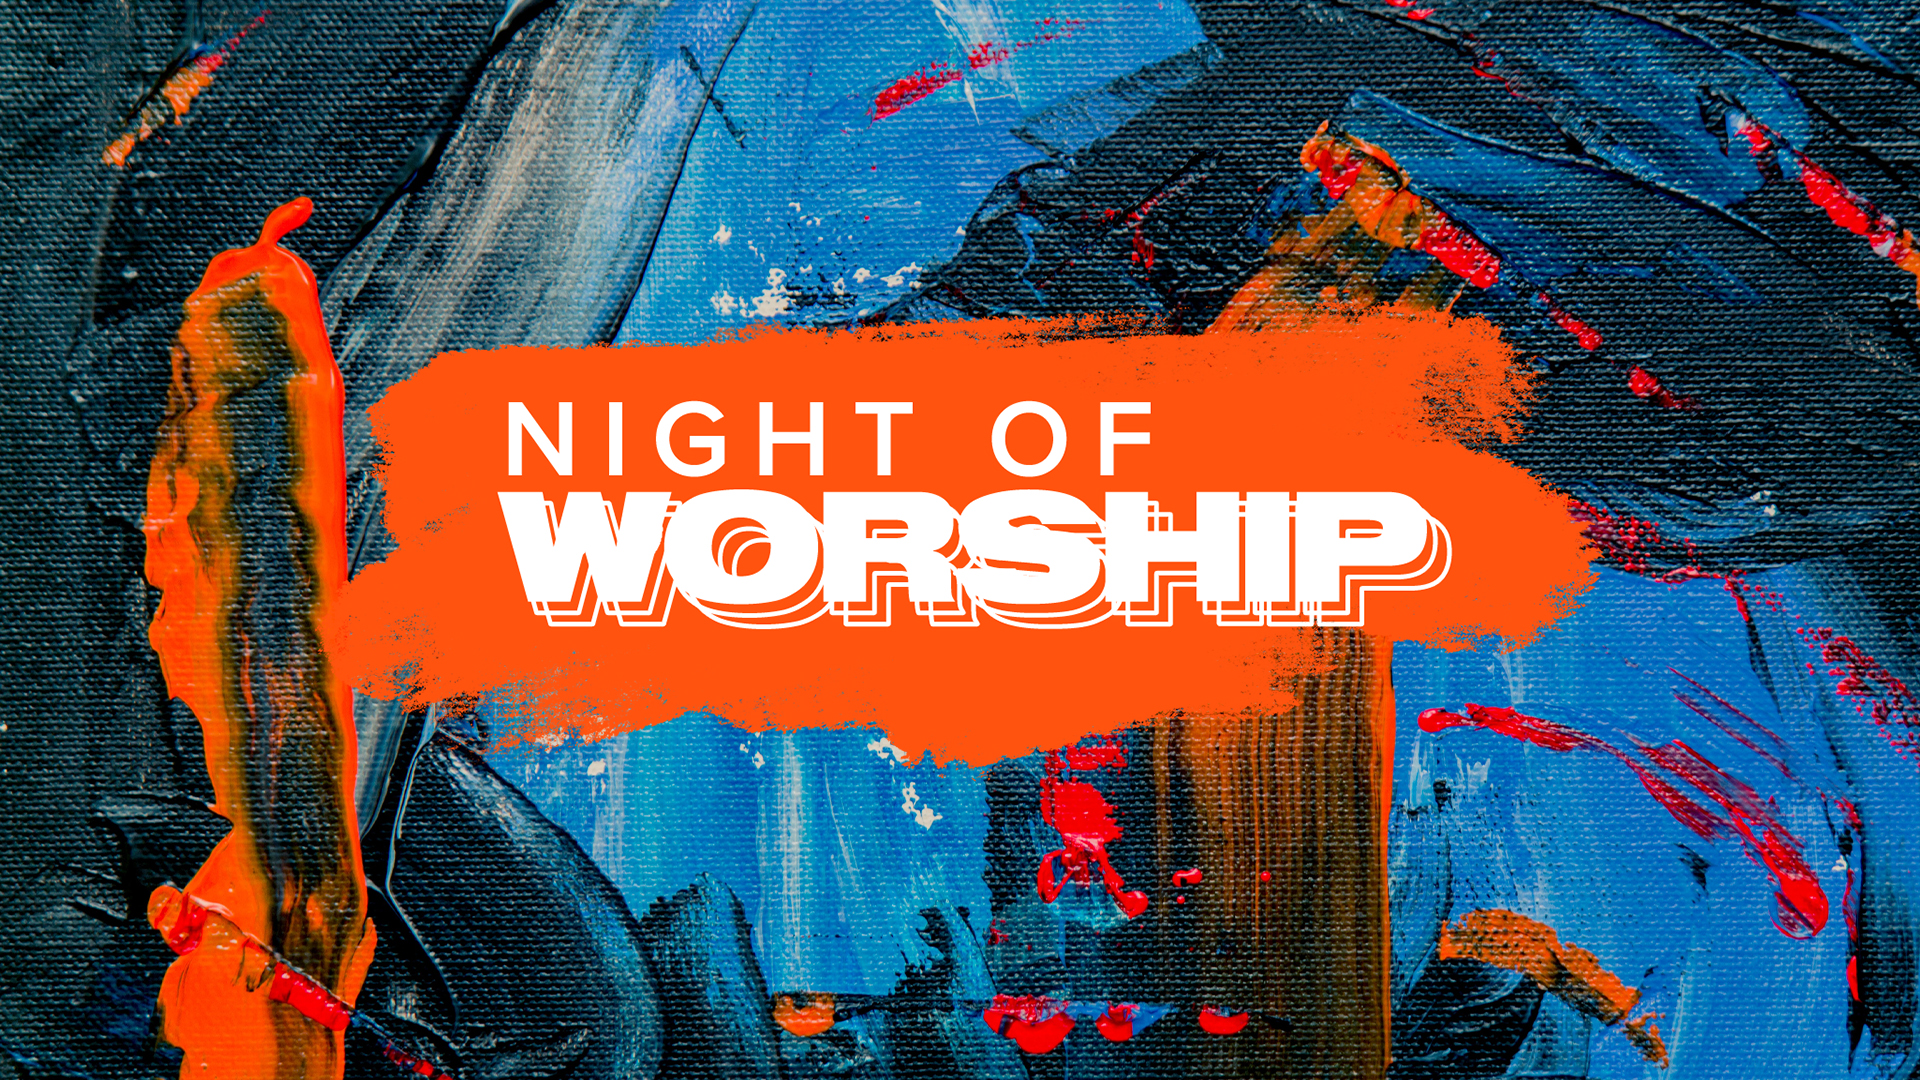 August Night of Worship HD Title Slide image